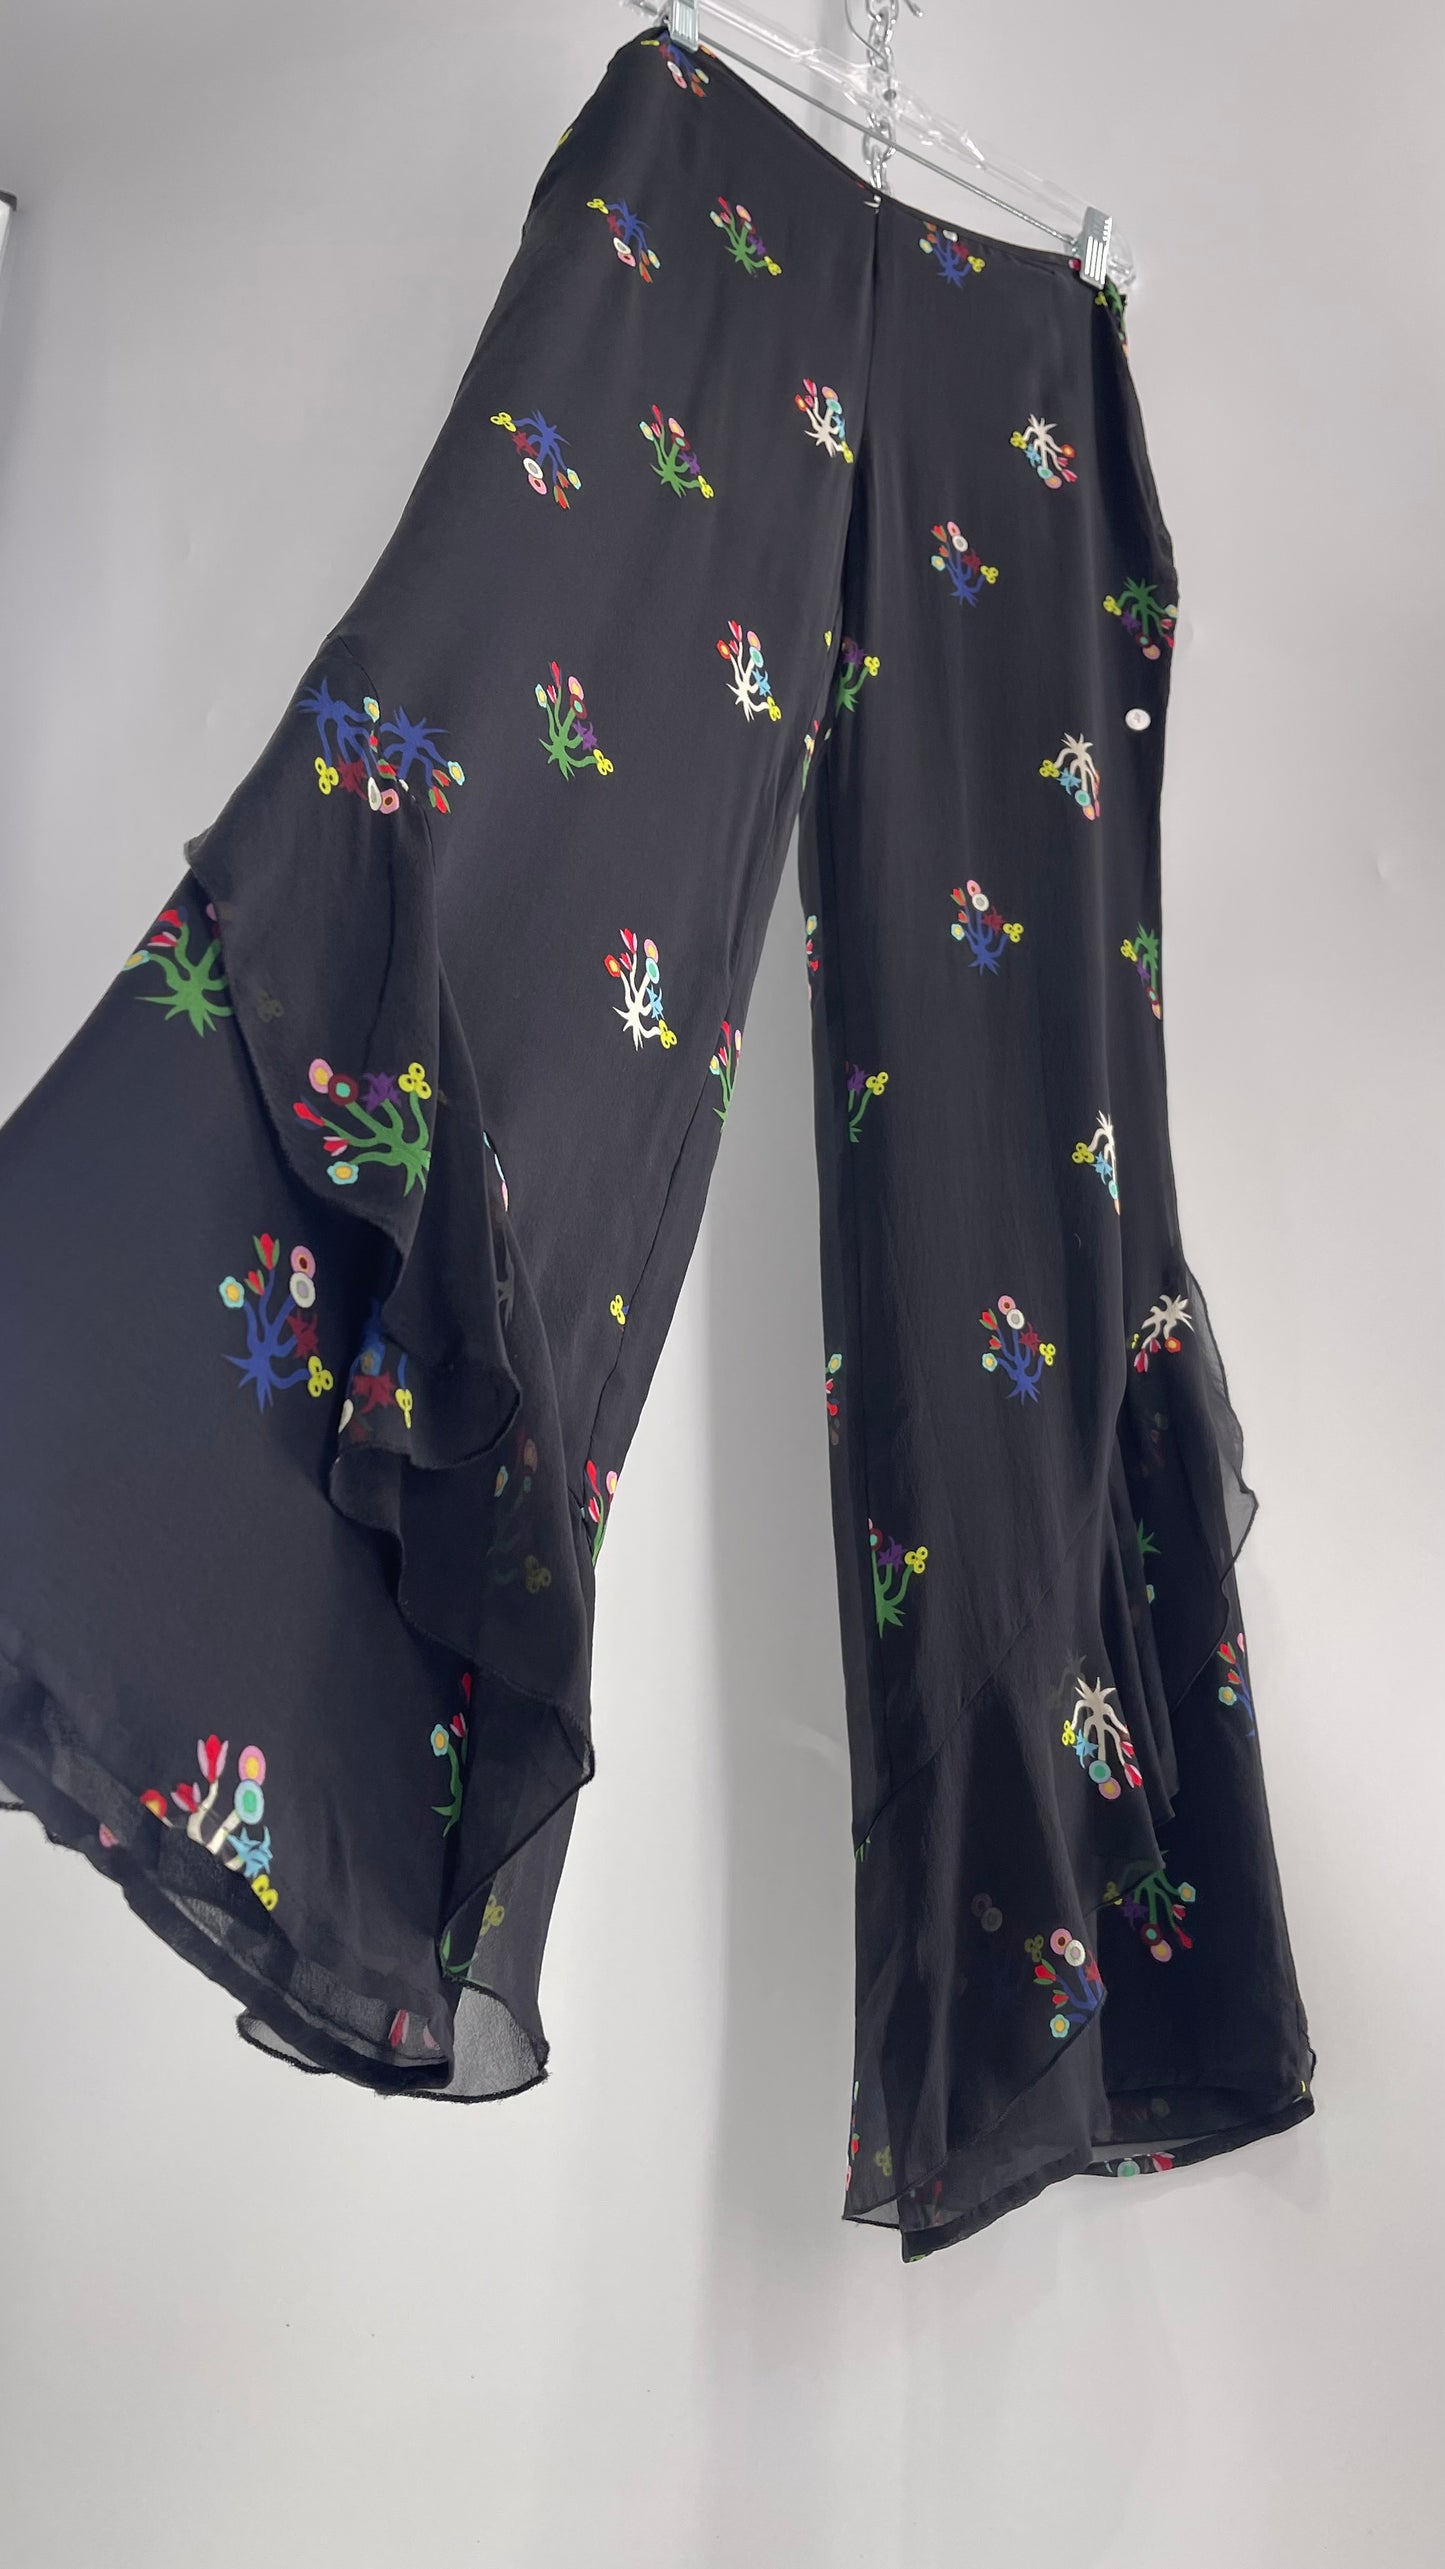 Cynthia Rowley Black Flared Pants with Colorful Abstract Florals, Dual Lining and Ruffle Trim (4)